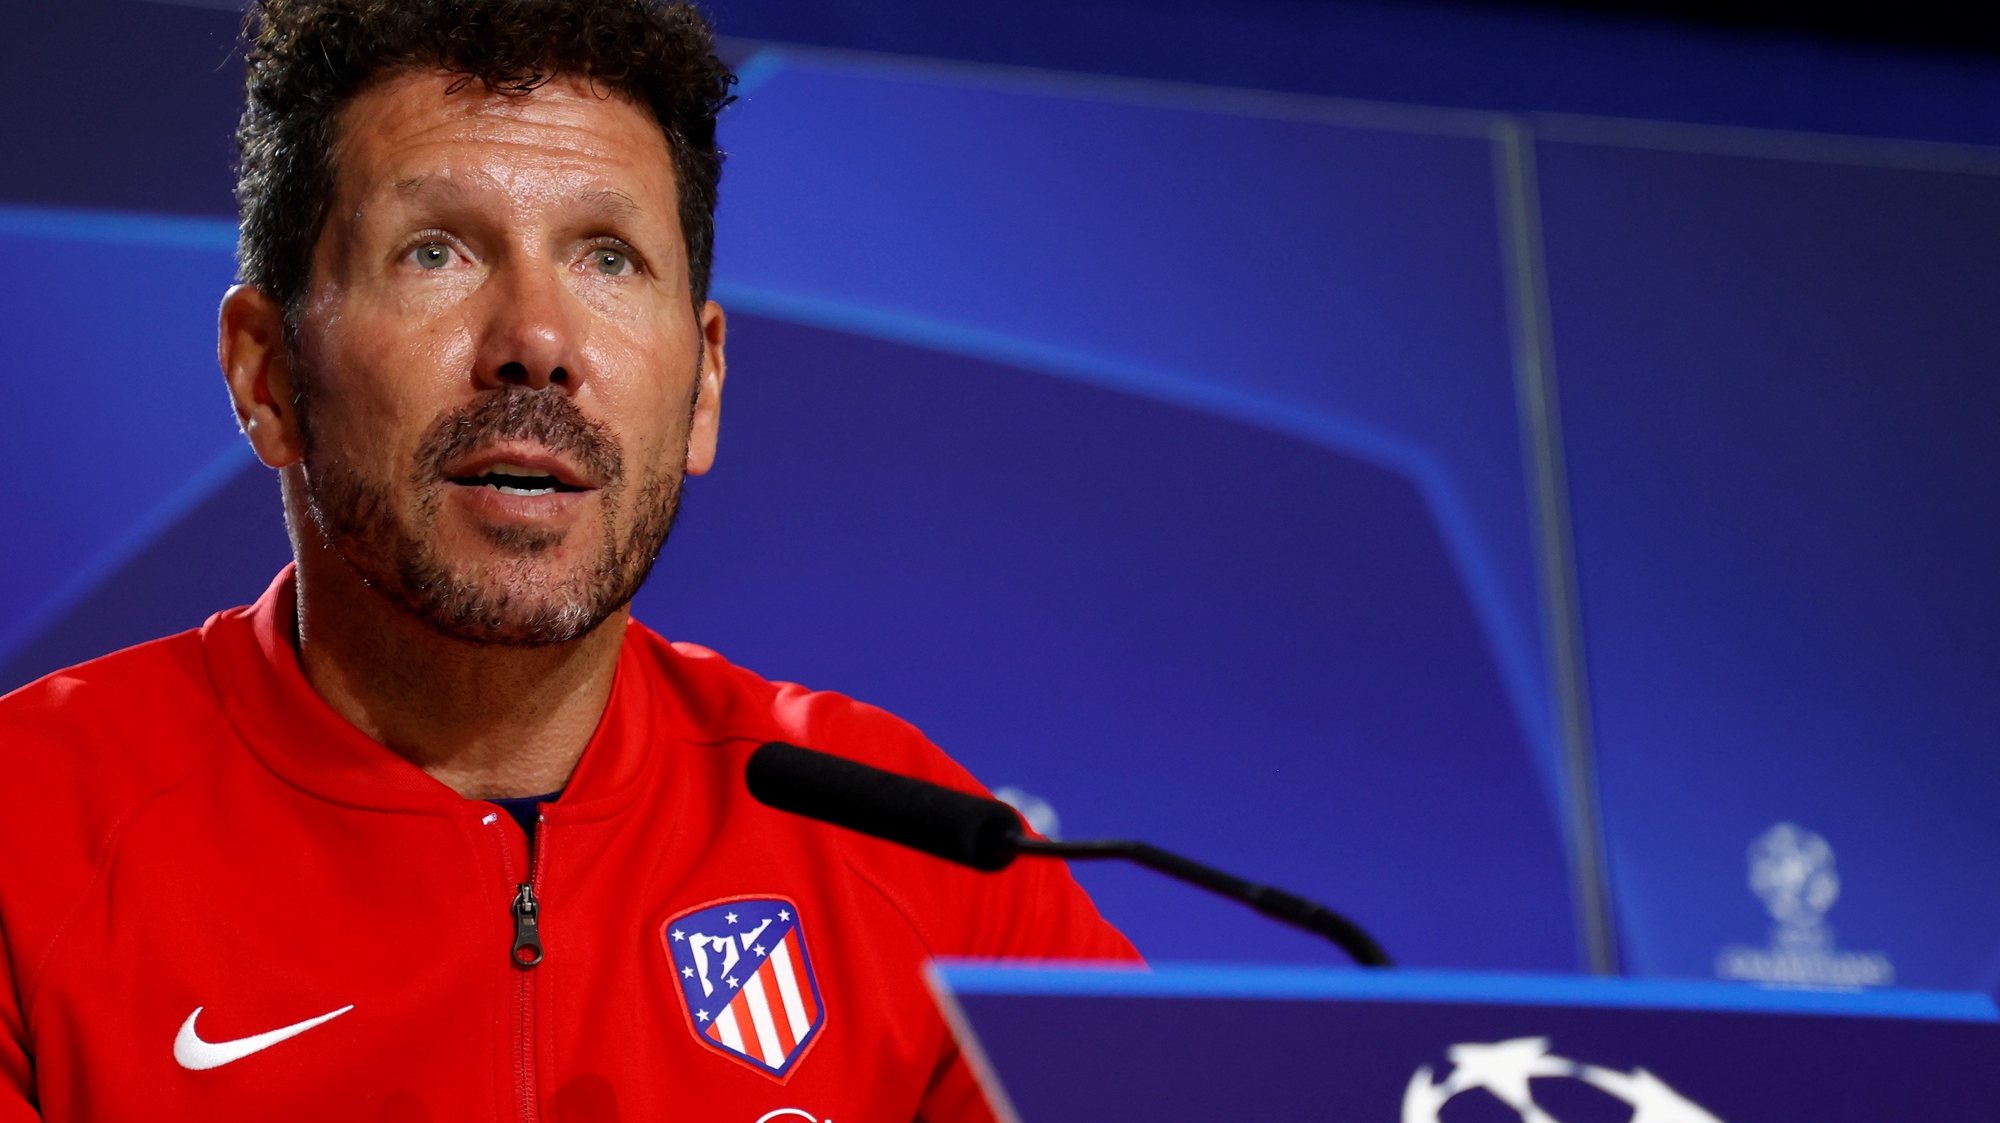 epa09467396 A handout photo made available by Spanish La Liga soccer club Atletico Madrid of head coach Diego Simeone speaking during a press conference at Metropolitano stadium in Madrid, Spain, 14 September 2021. Atletico Madrid will face FC Porto in their UEFA Champions League group B soccer match on 15 September 2021.  EPA/Atletico Madrid HANDOUT  HANDOUT EDITORIAL USE ONLY/NO SALES